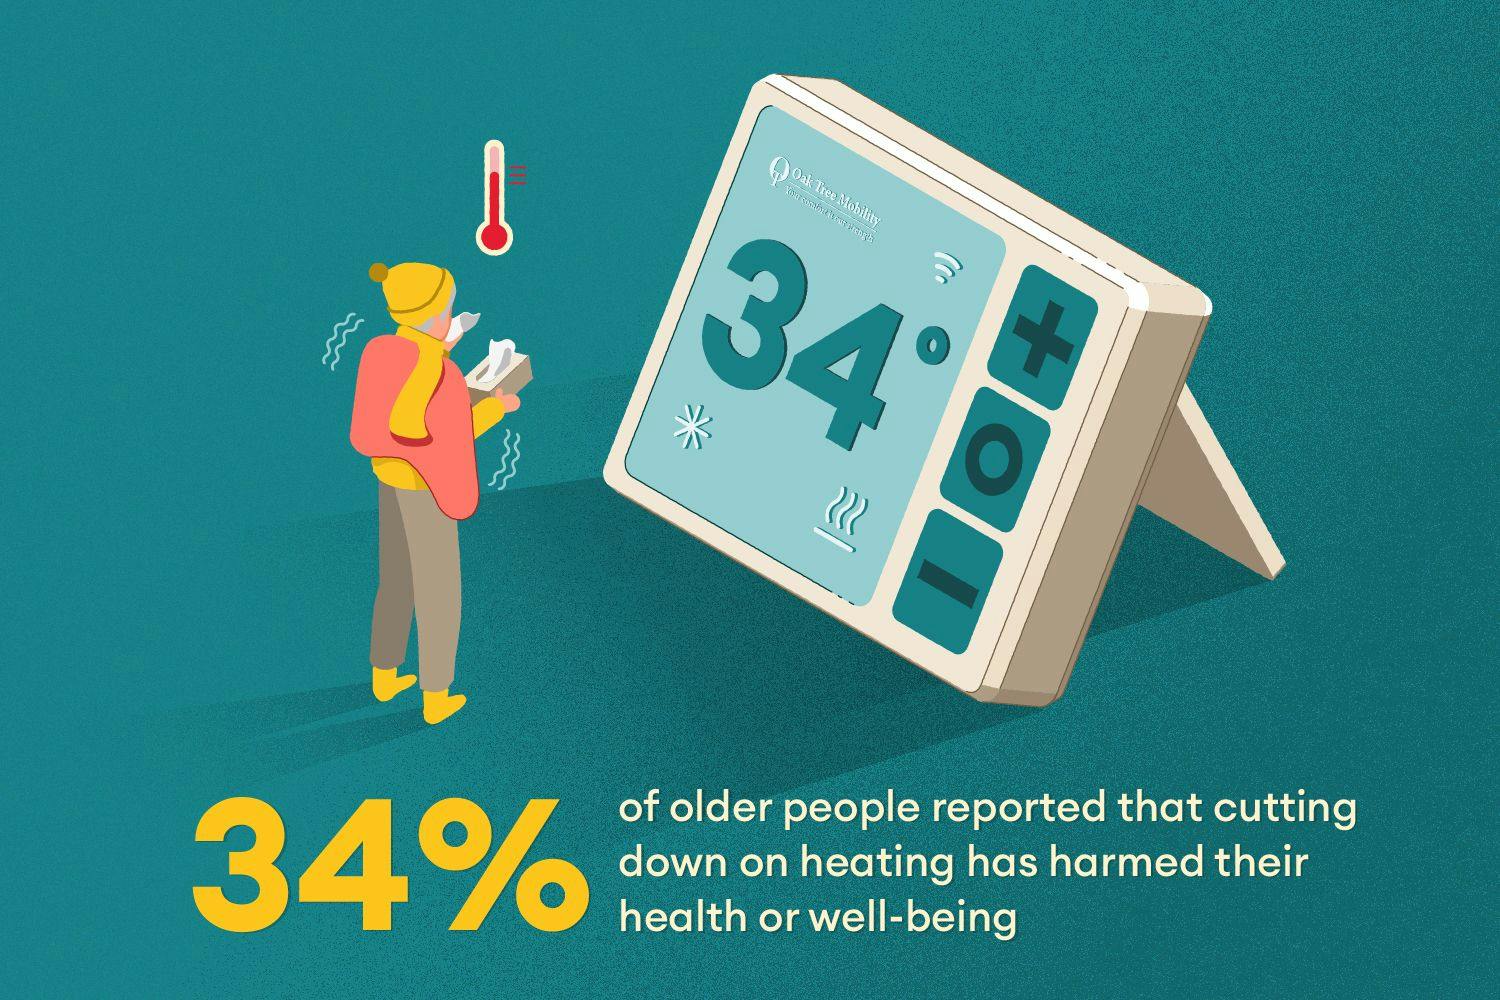 Text: '34% of older people reported that cutting down on heating has harmed their health and well-being'